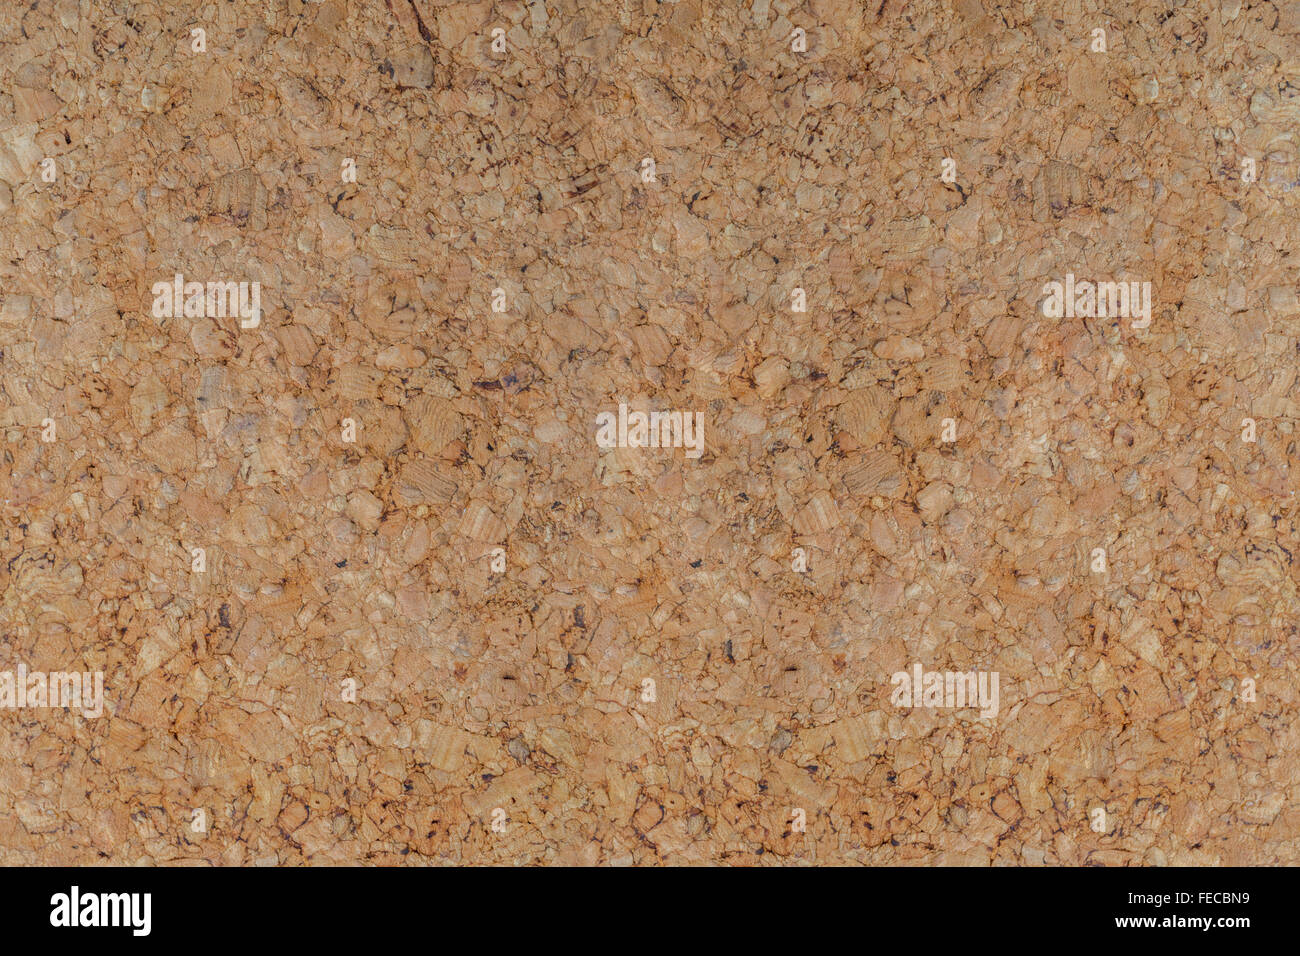 close-up view of a cork board texture Stock Photo